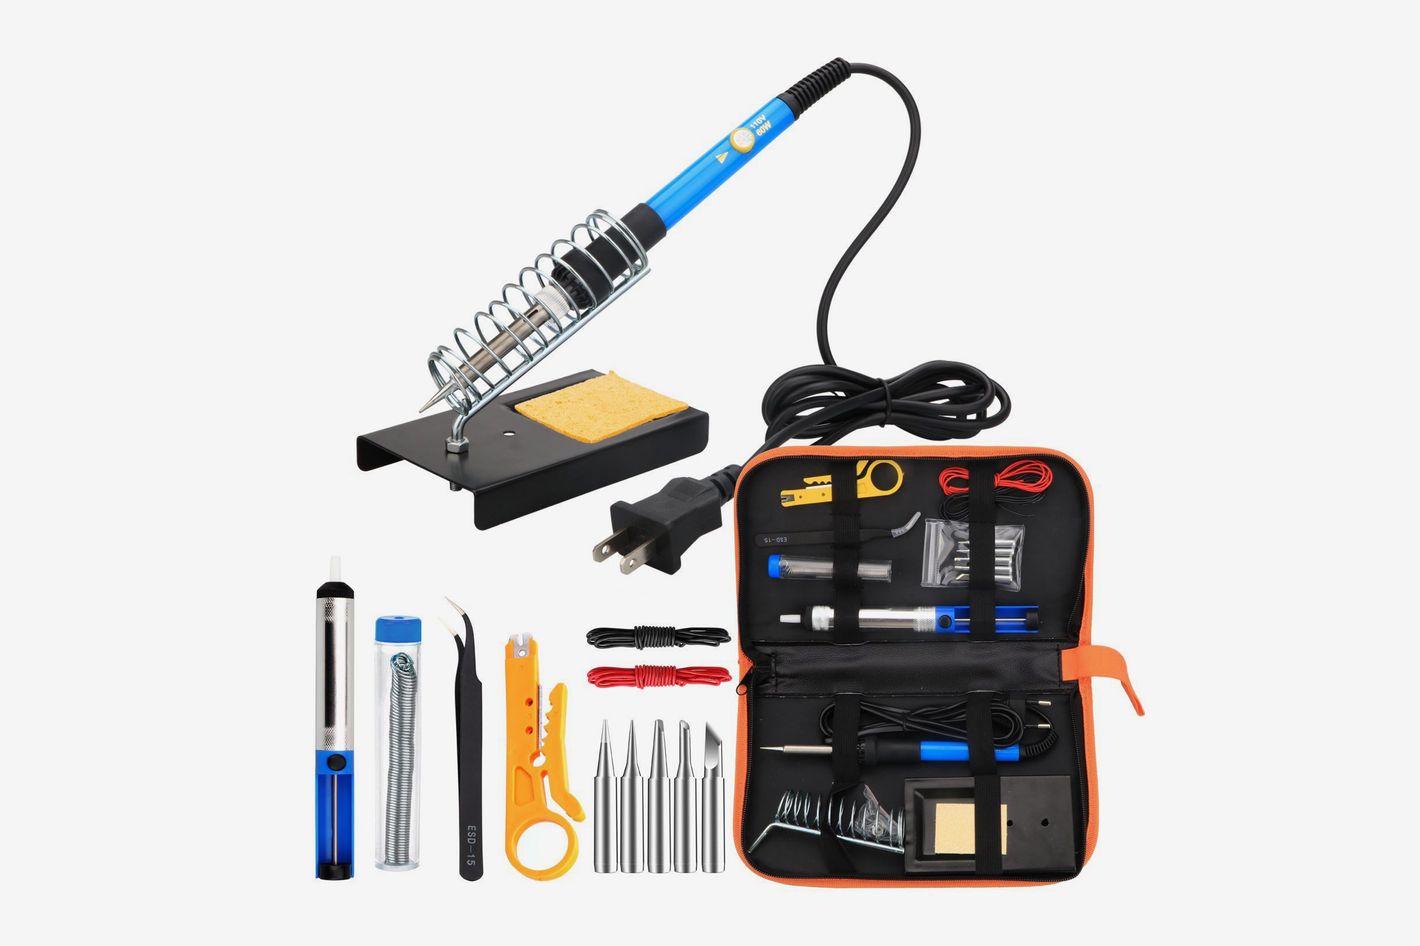 Plug Type: UK Soldering 20 in 1 60W Electric Soldering Iron Set Portable Electric iron Tools Kit Accessories 